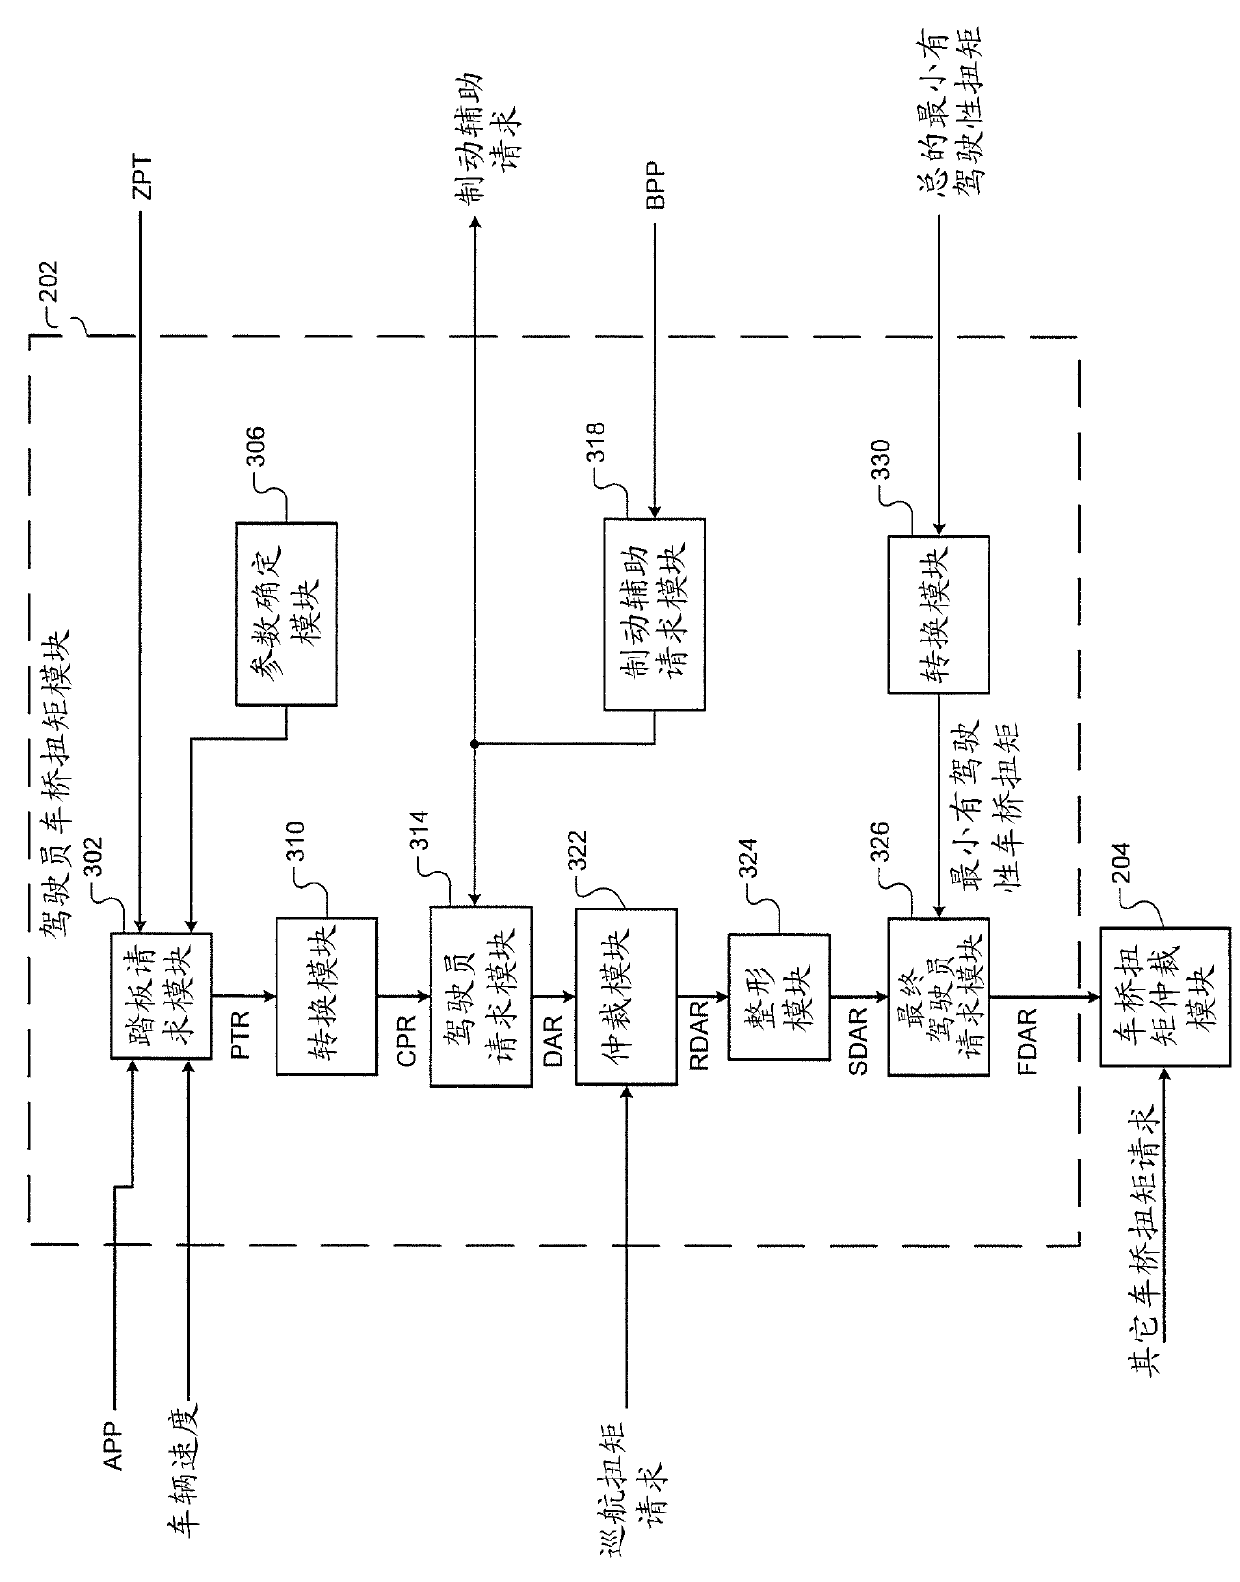 Driver torque request systems and methods